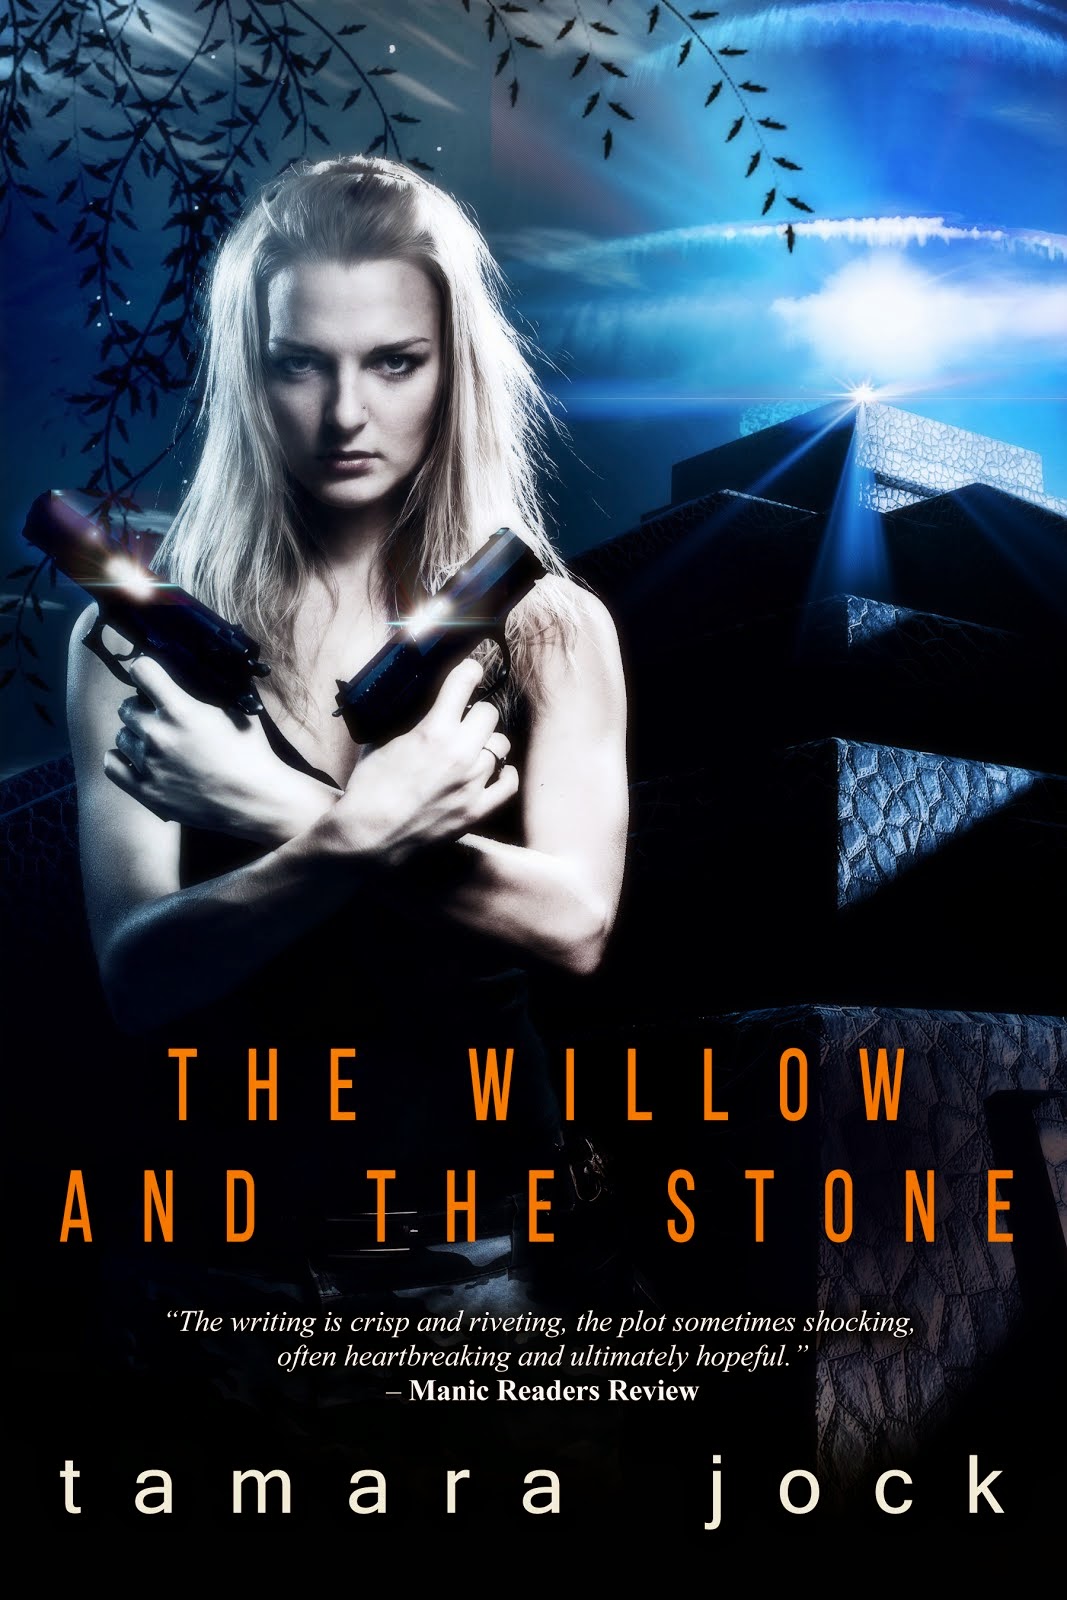 The Willow and the Stone